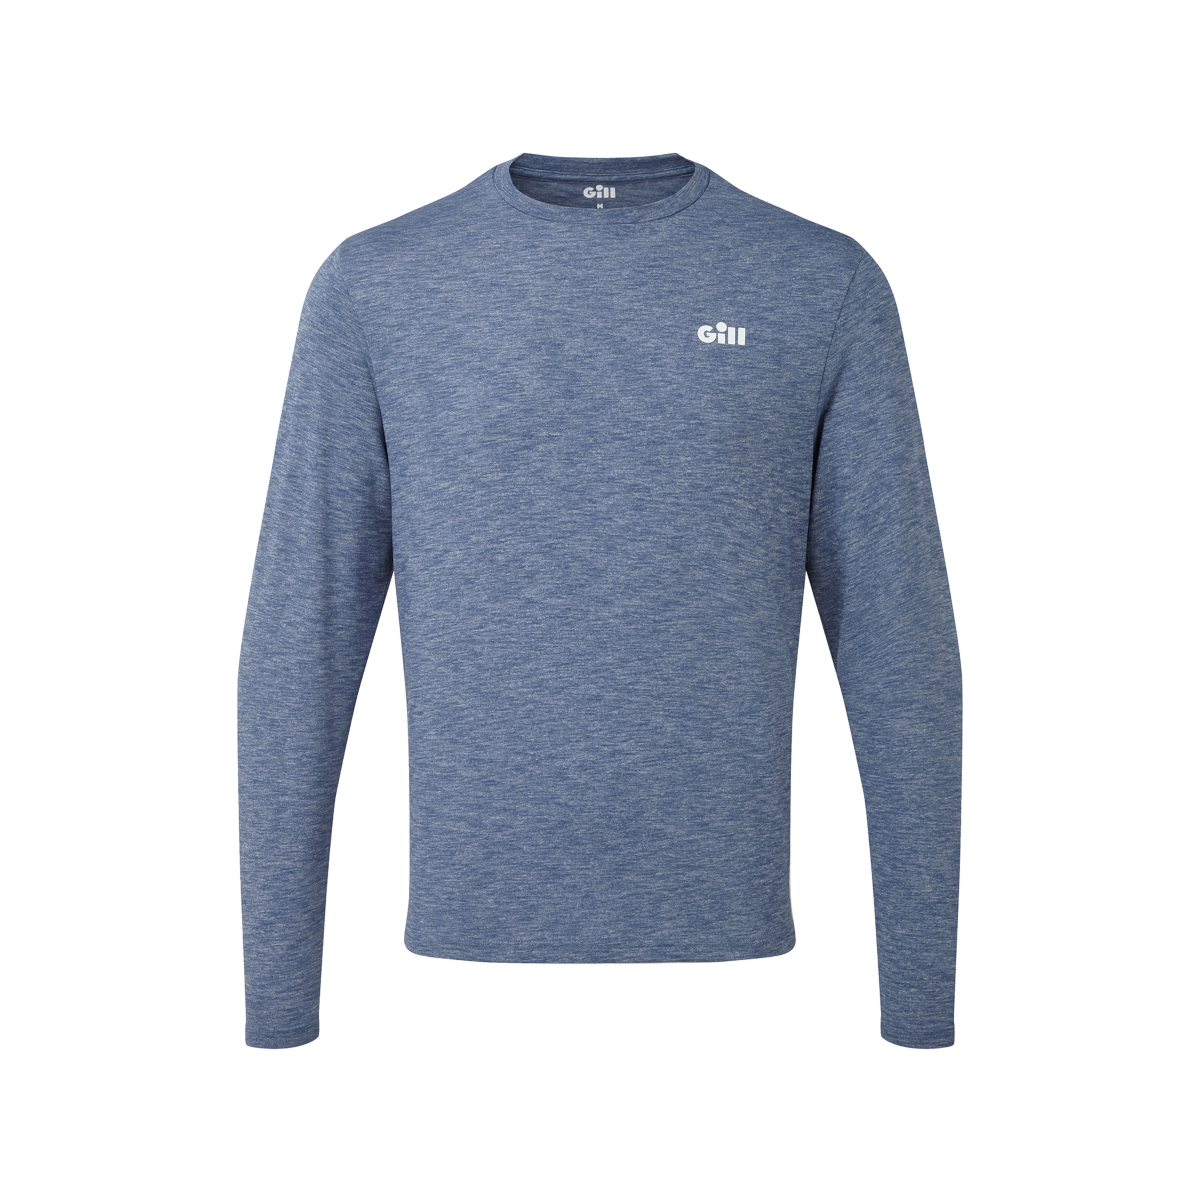 Gill Holcombe Crew t-shirt, manches longues, homme - bleu, taille M